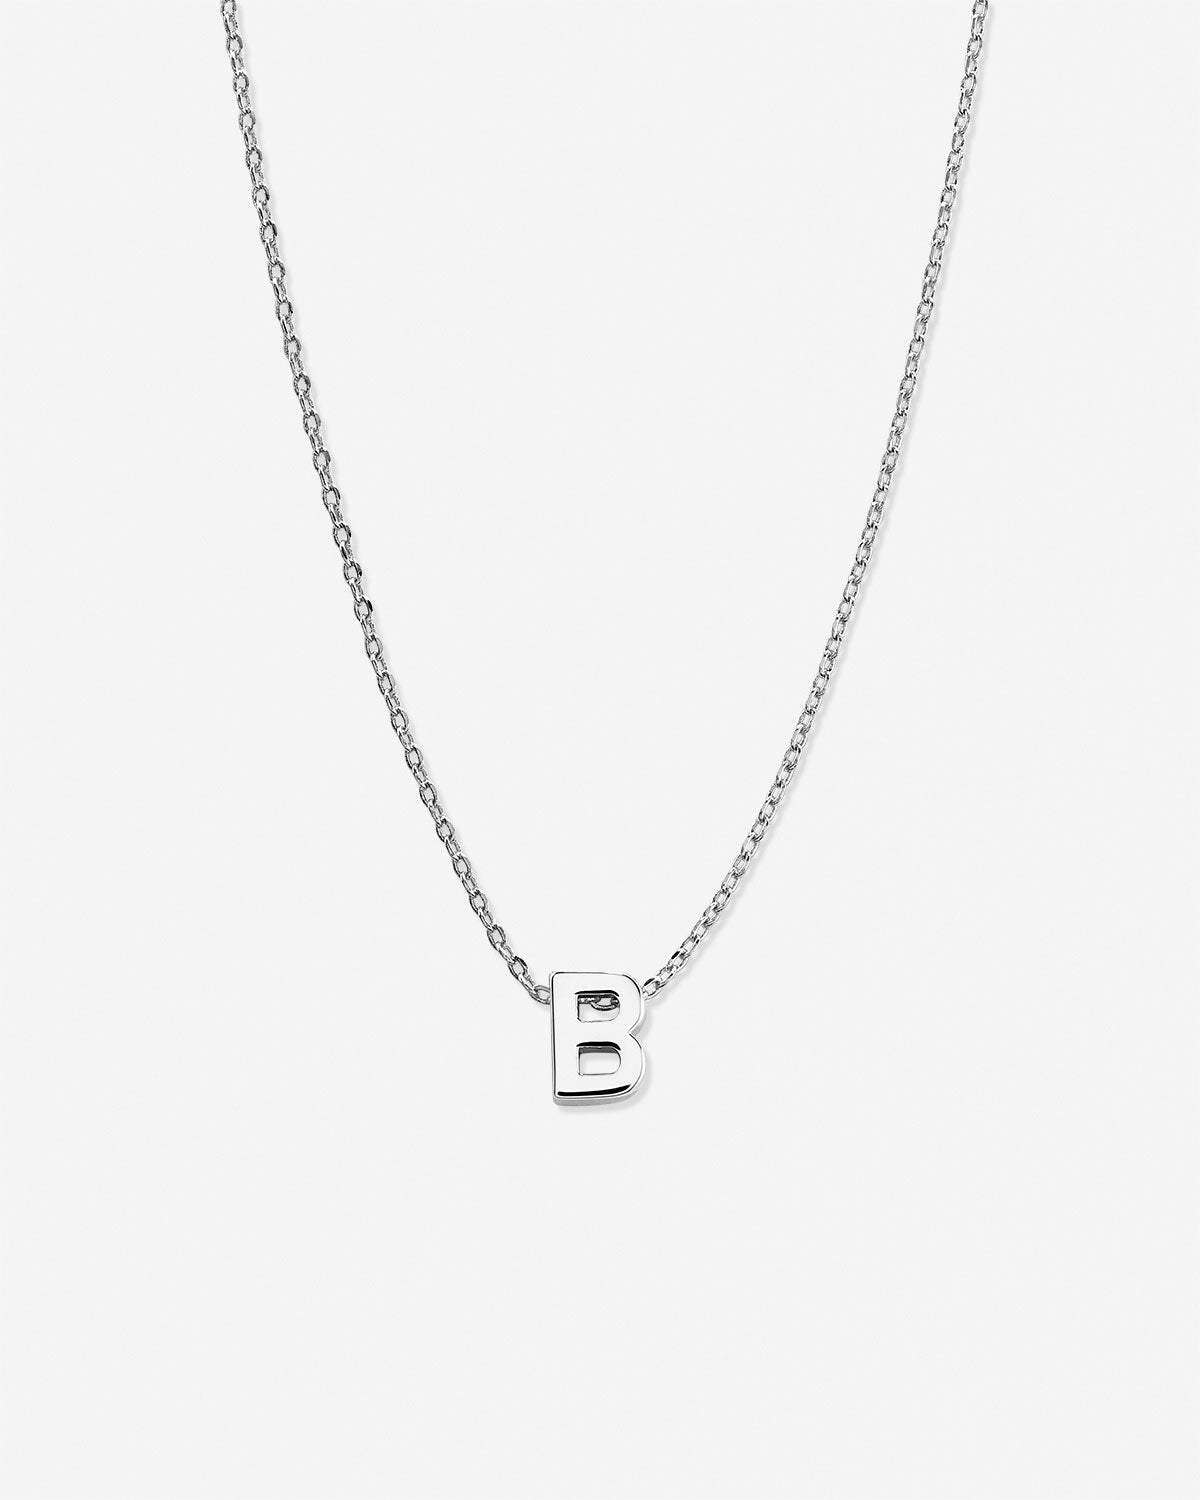 Initial B Necklace Adjustable 41-46cm/16-18' in 18k Gold Vermeil on  Sterling Silver | Jewellery by Monica Vinader